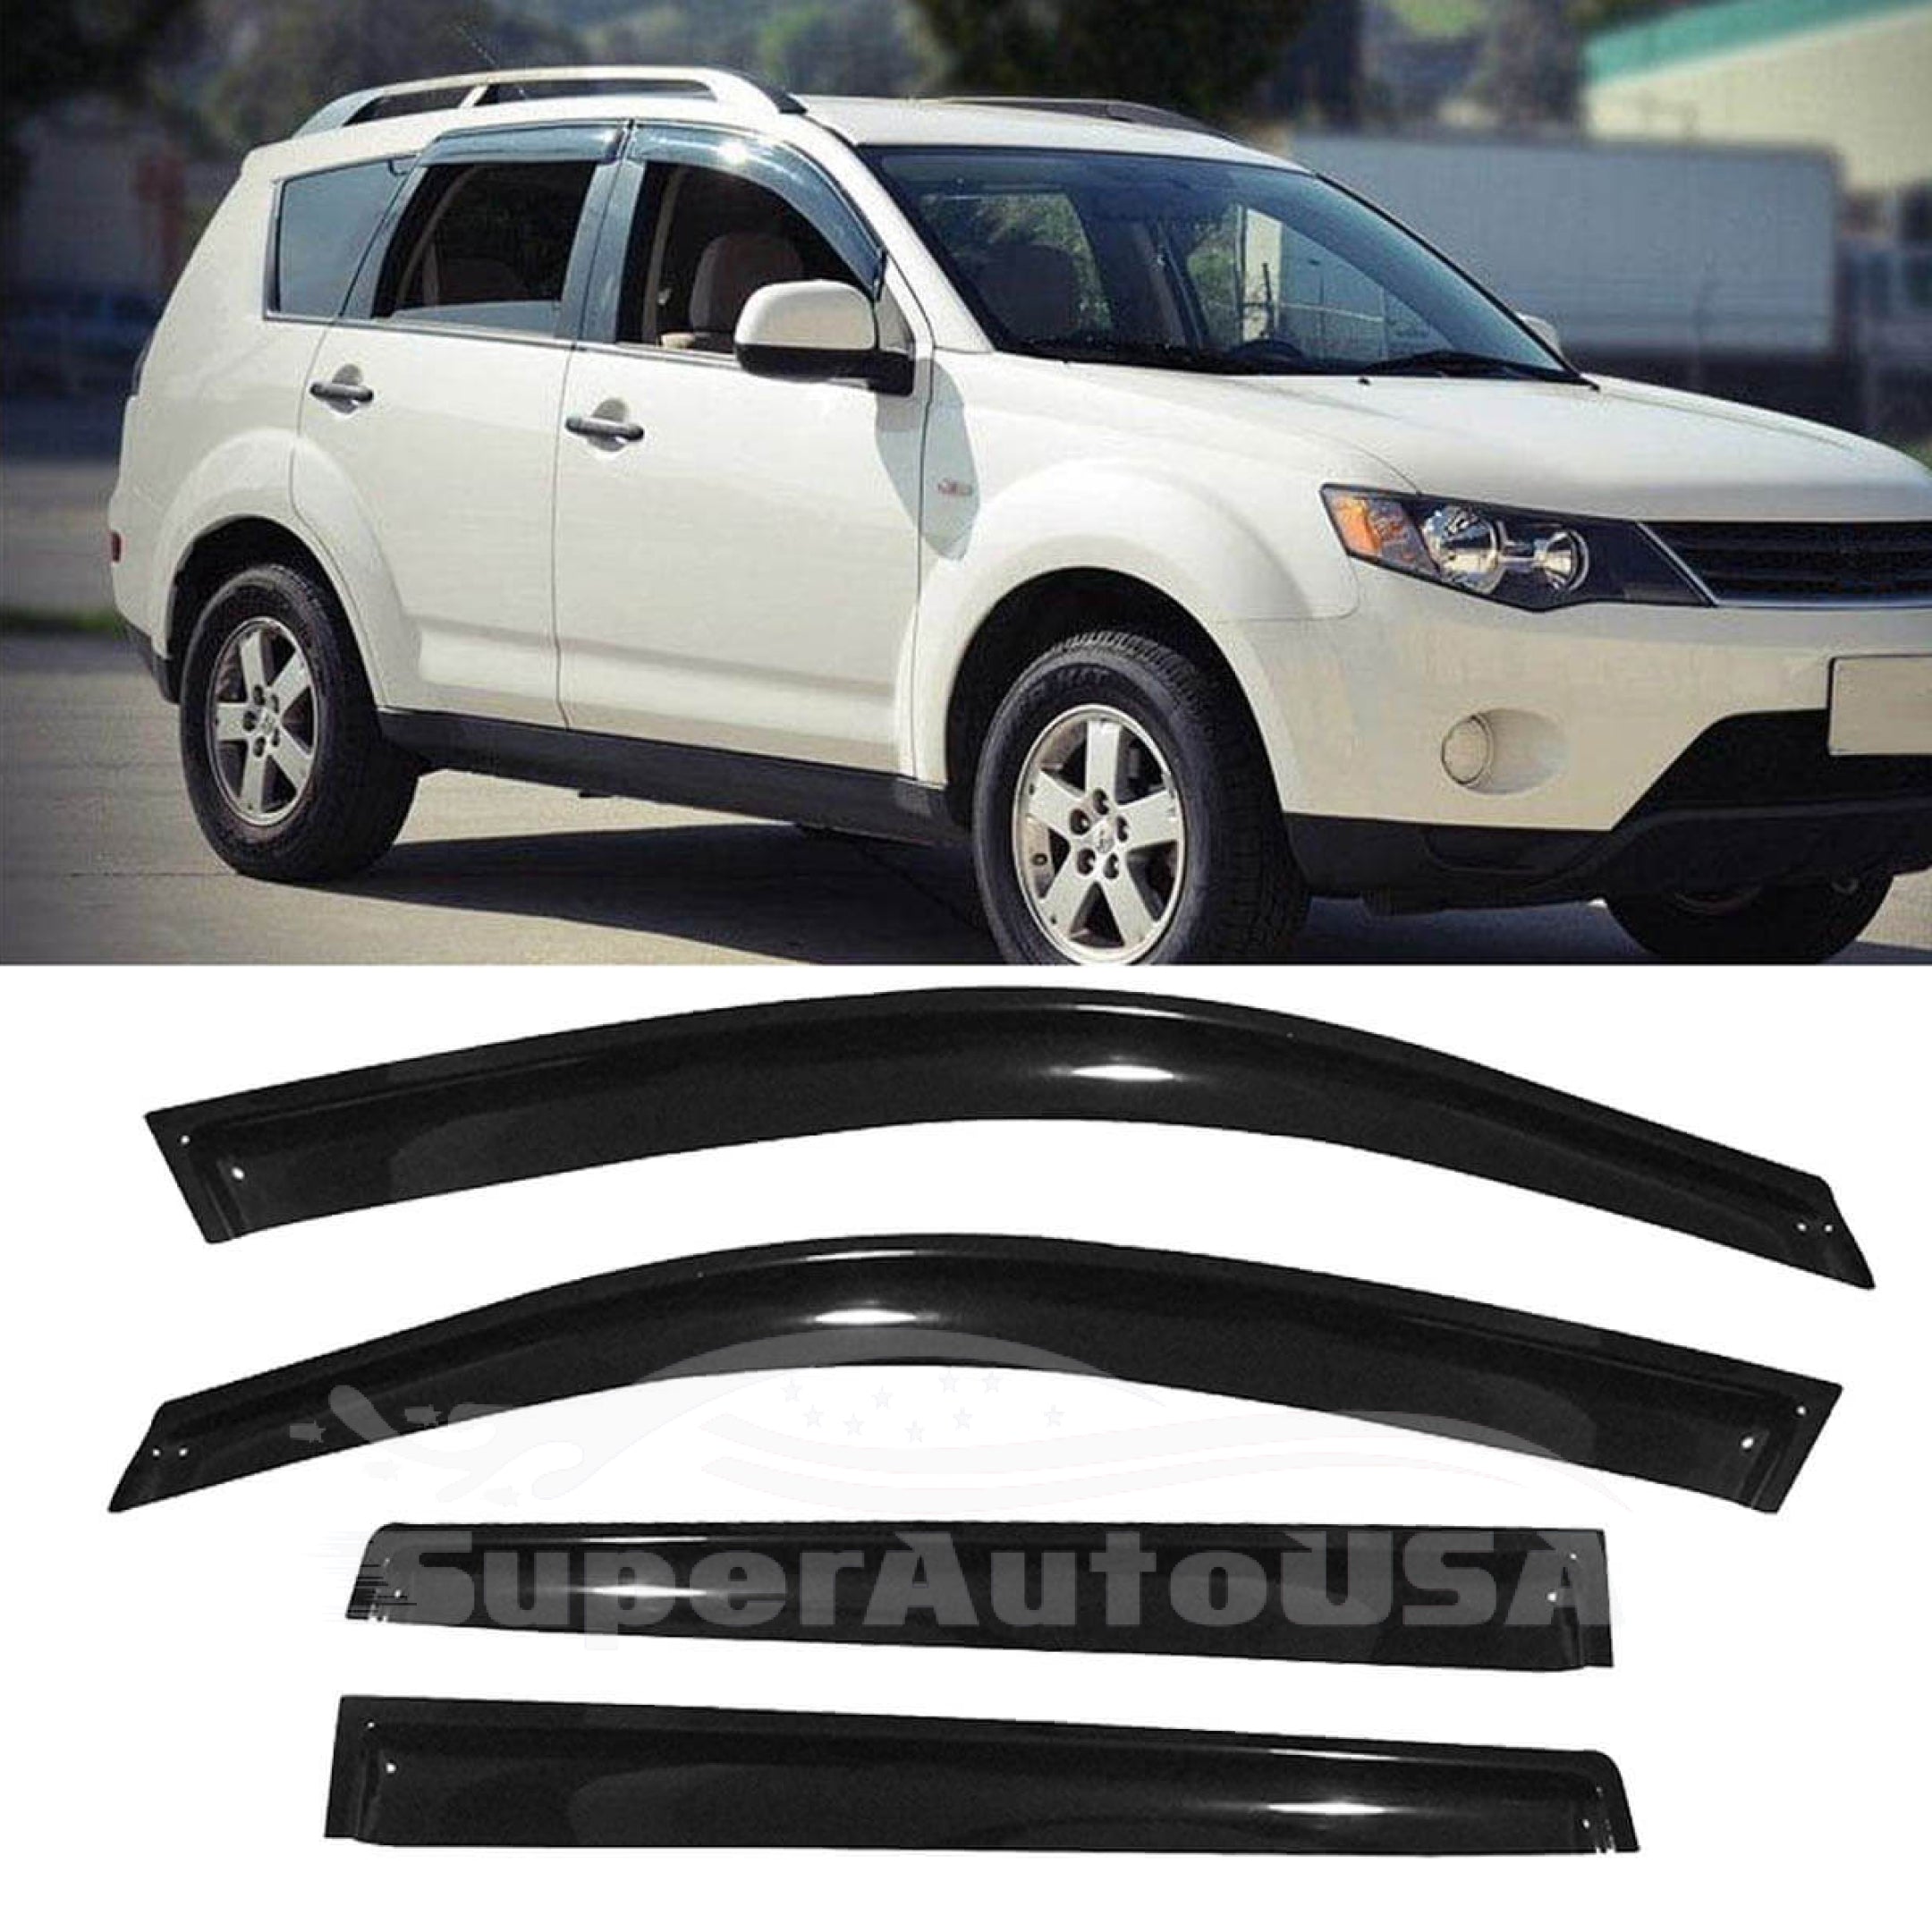 Fit 2009-2014 Acura TSX Out-Channel Vent Window Visors Rain Sun Wind Guards Shade Deflectors